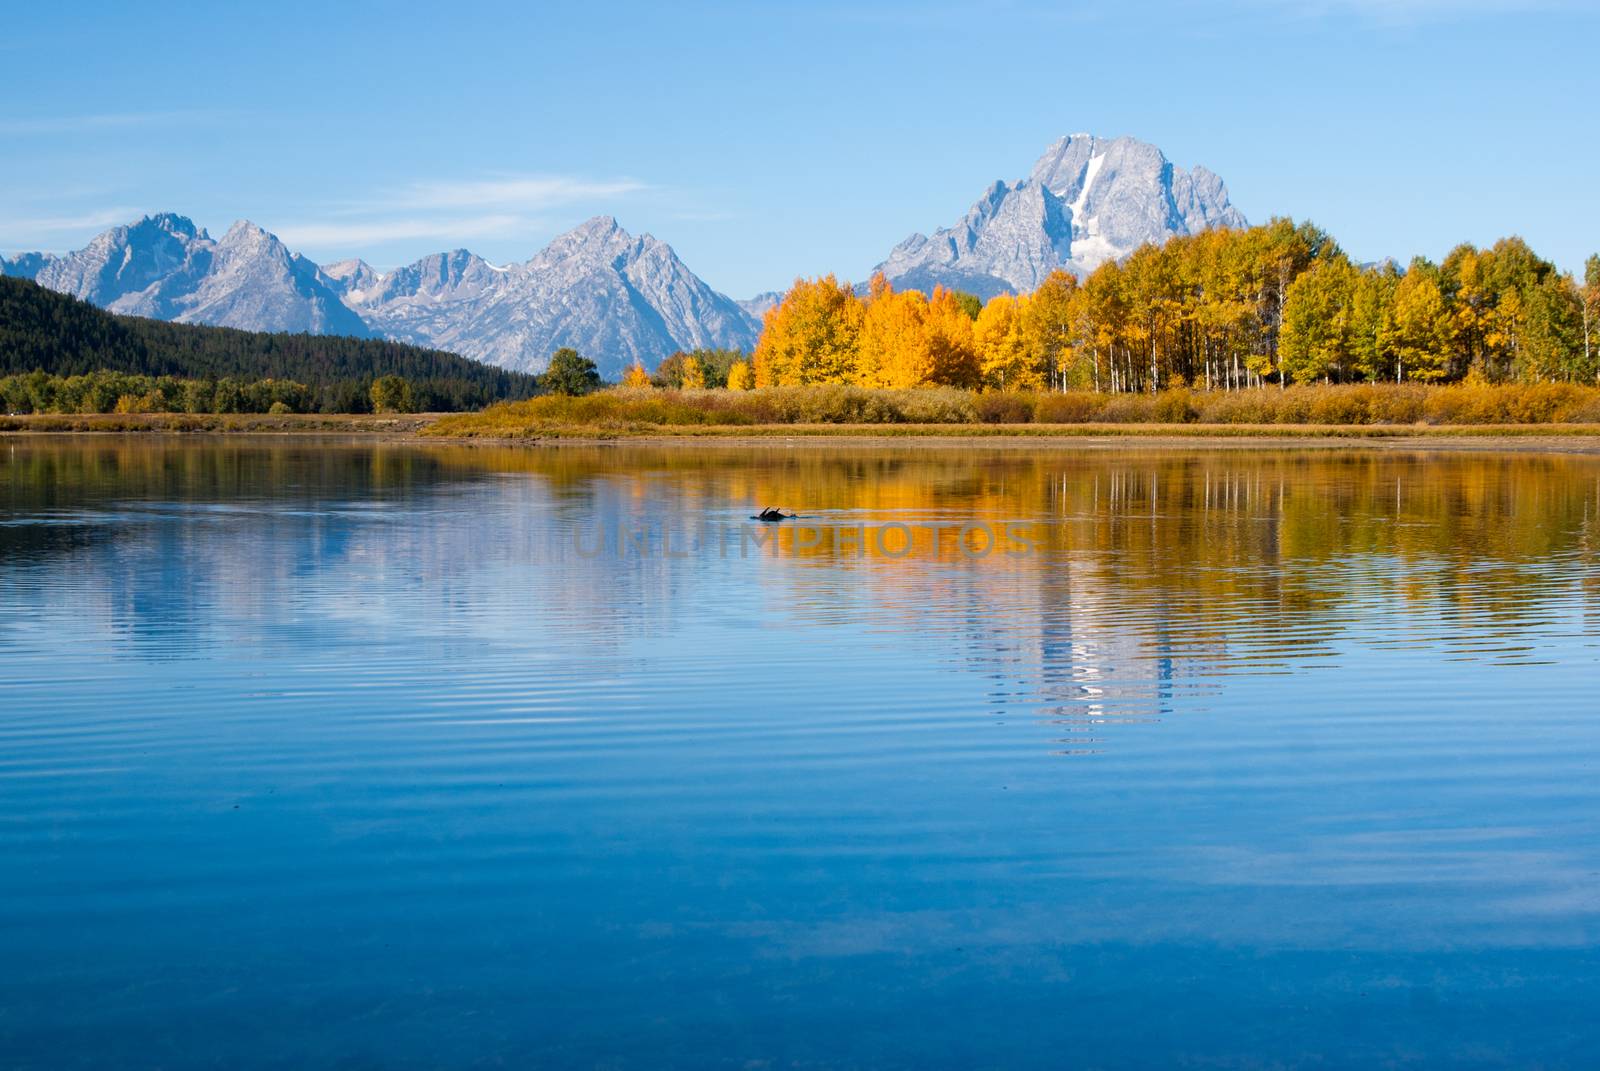 Moose swims in reflections of Grand tetons lake by emattil